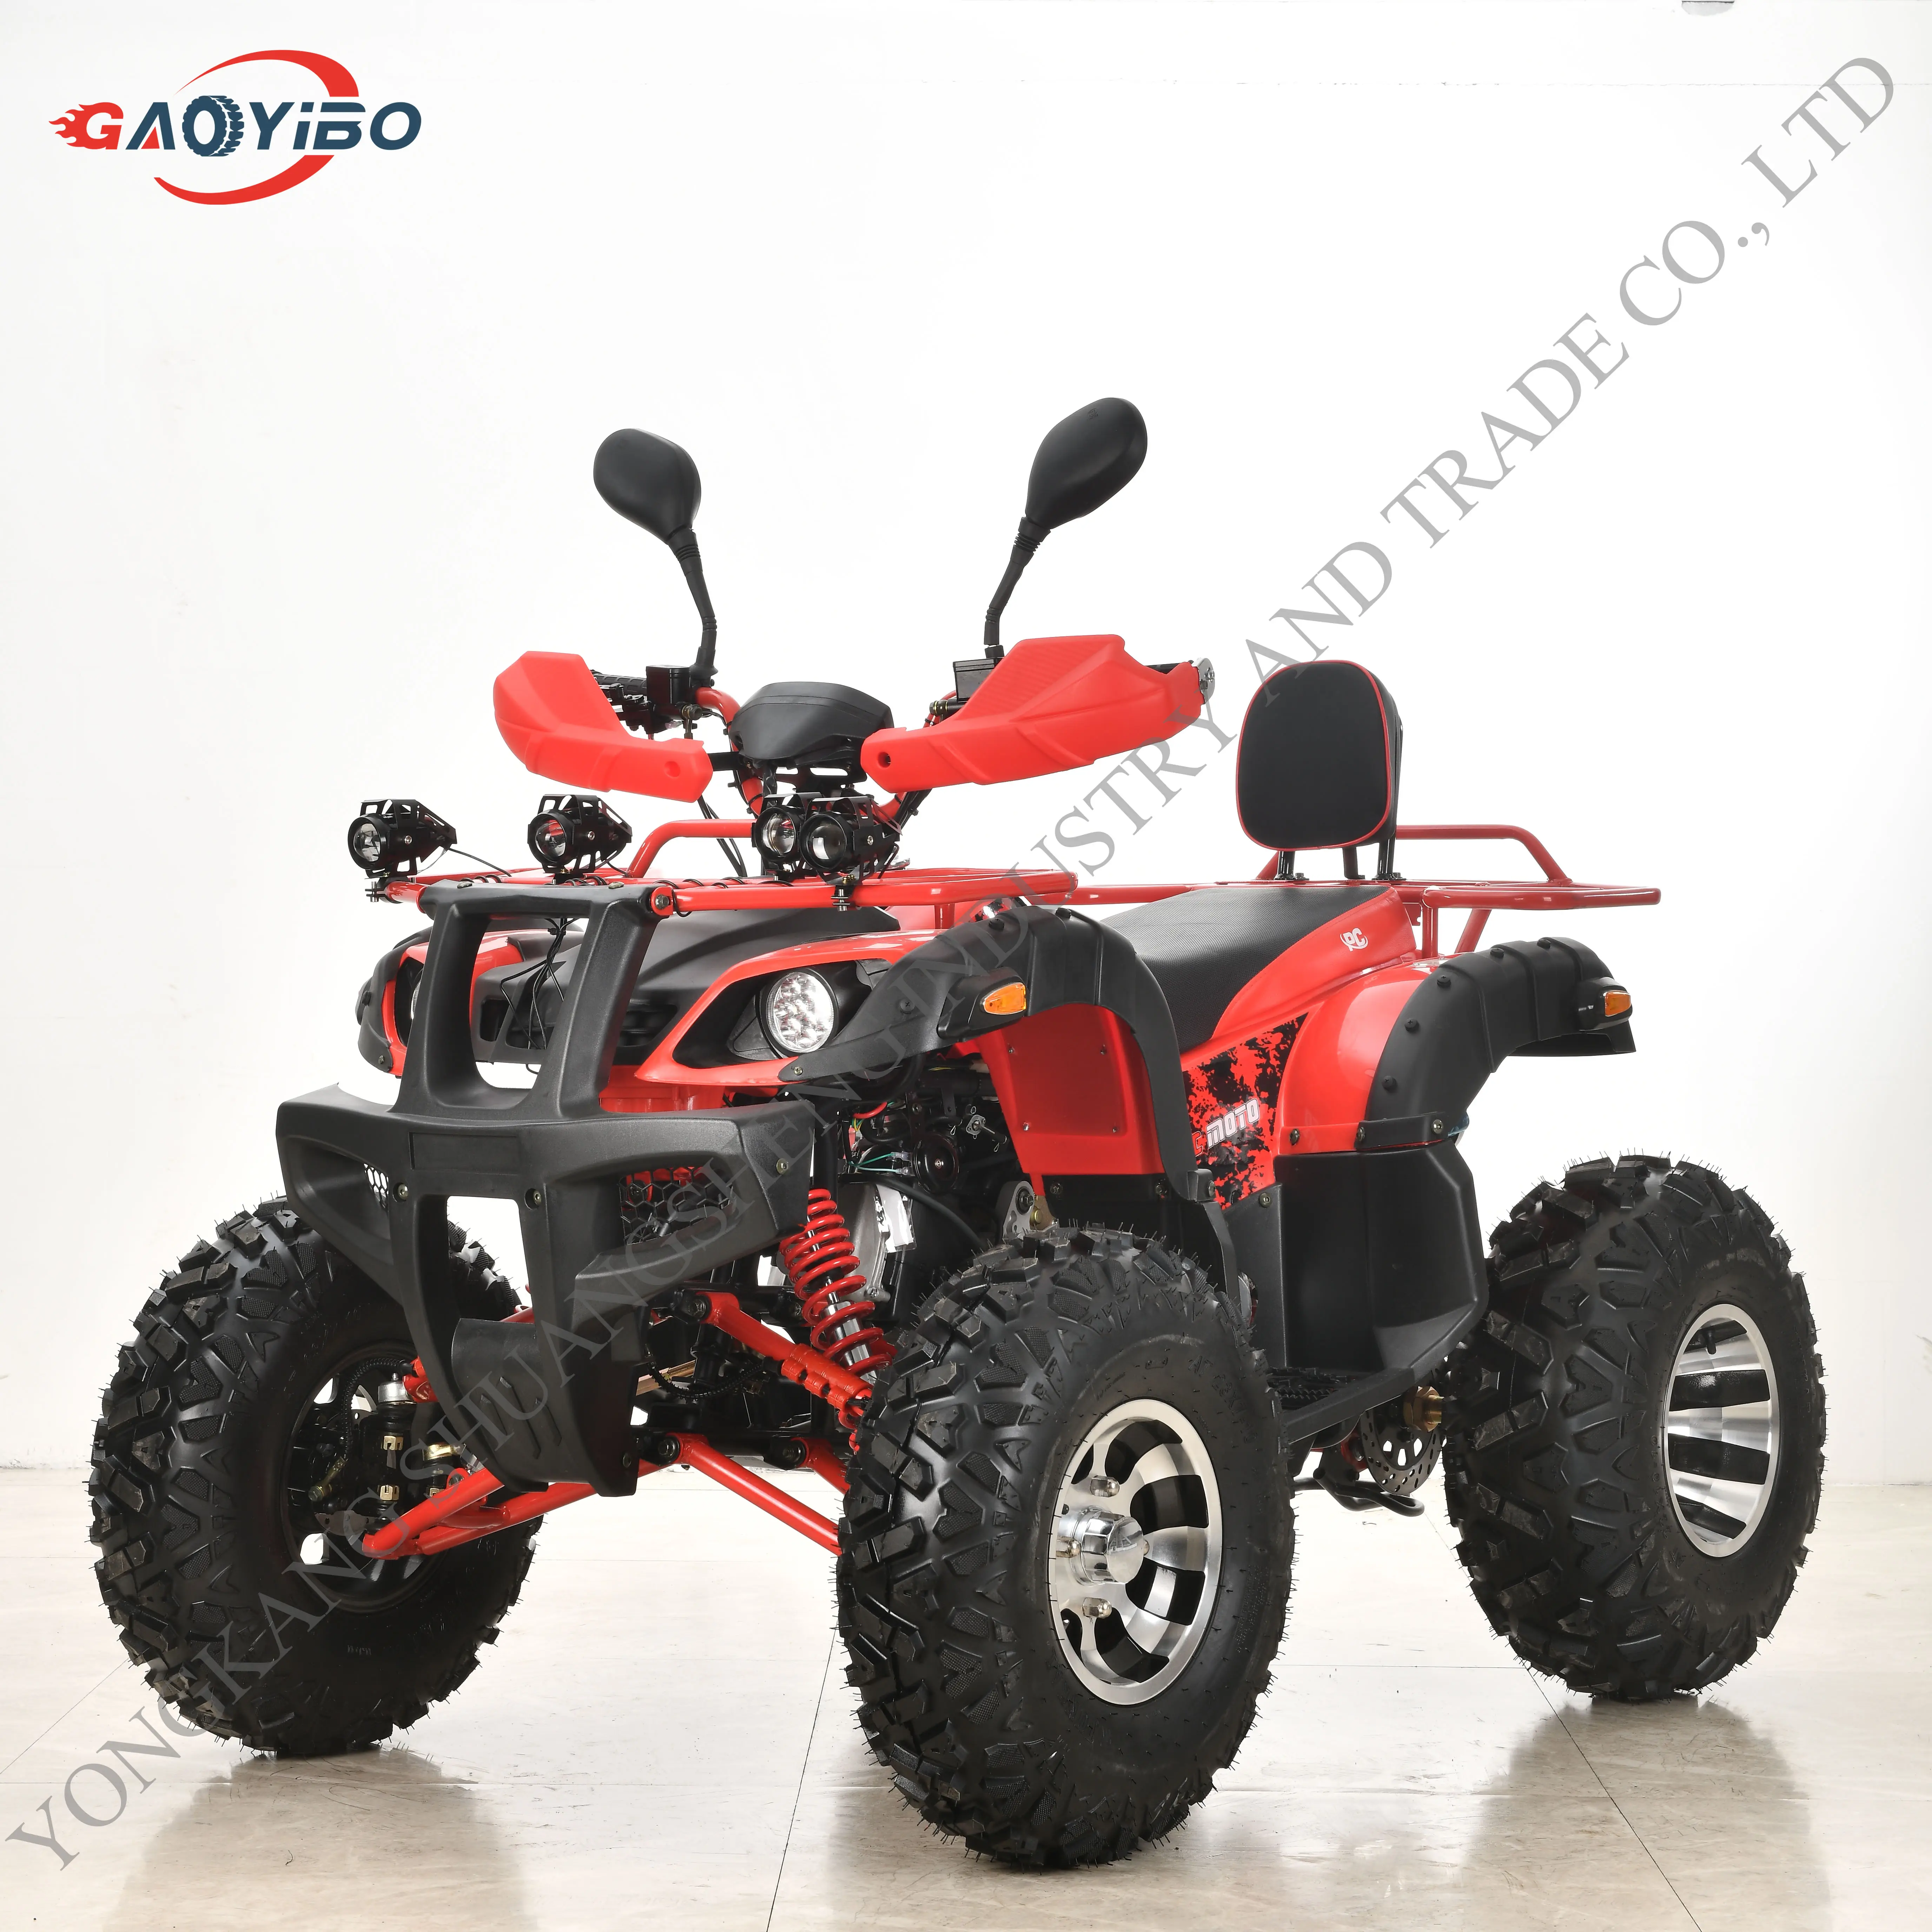 Hot selling quad atv 4x2 best atv 150cc for kids ATVs motorcycle quad safety and popular